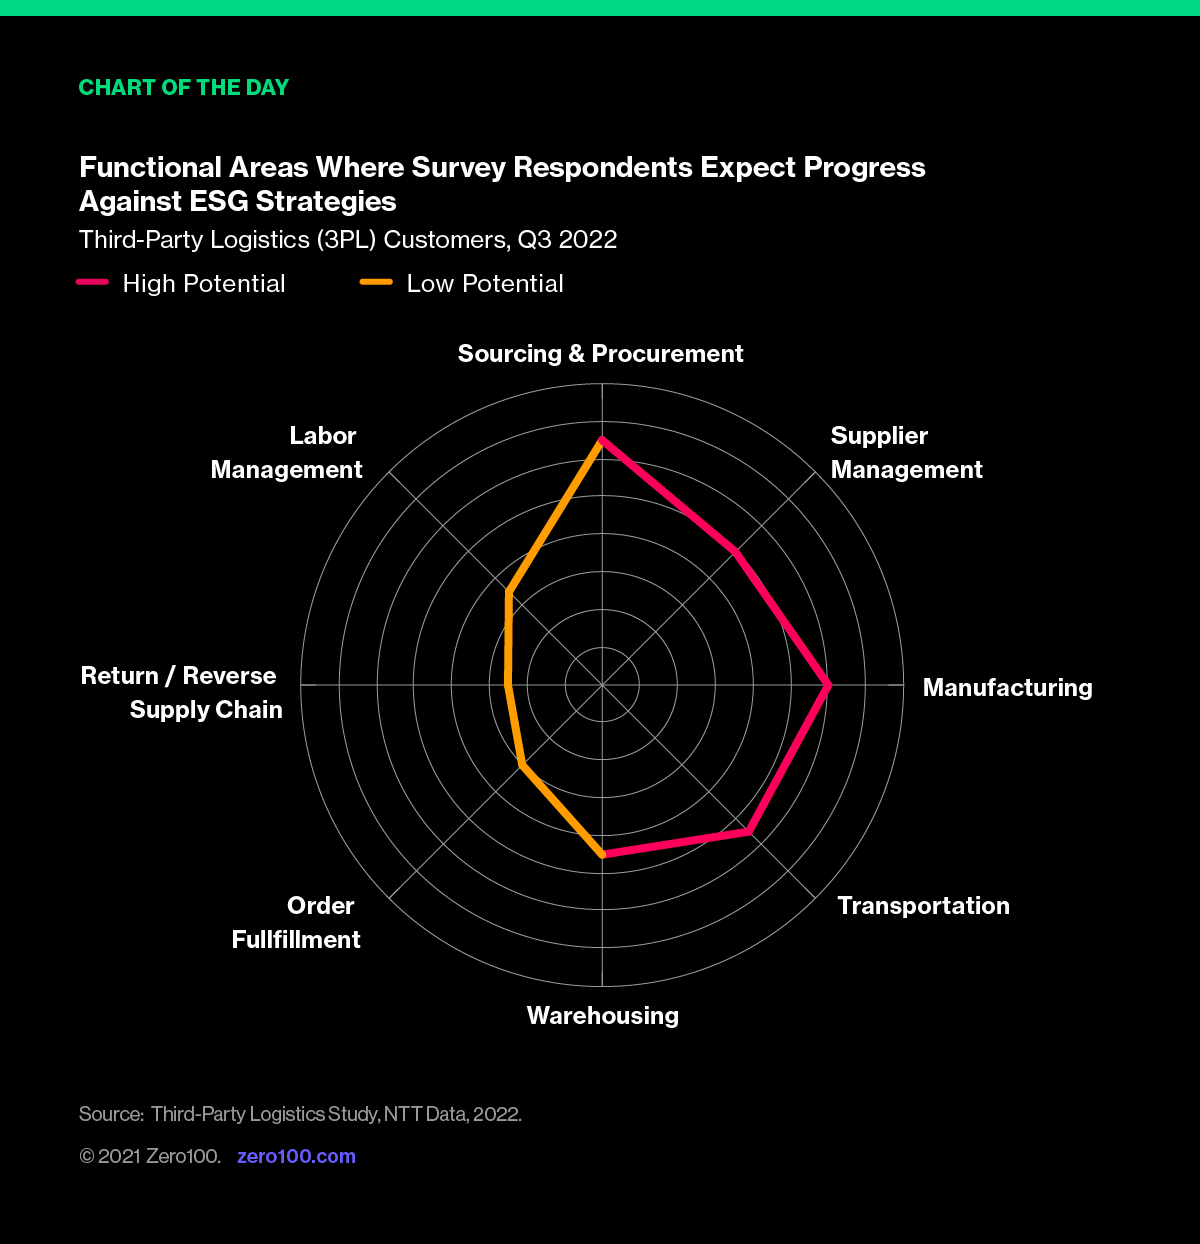 Chart depicting functional areas where survey respondents expect progress against ESG strategies. Source: Third-Party Logistics Study, NTT Data, 2022.